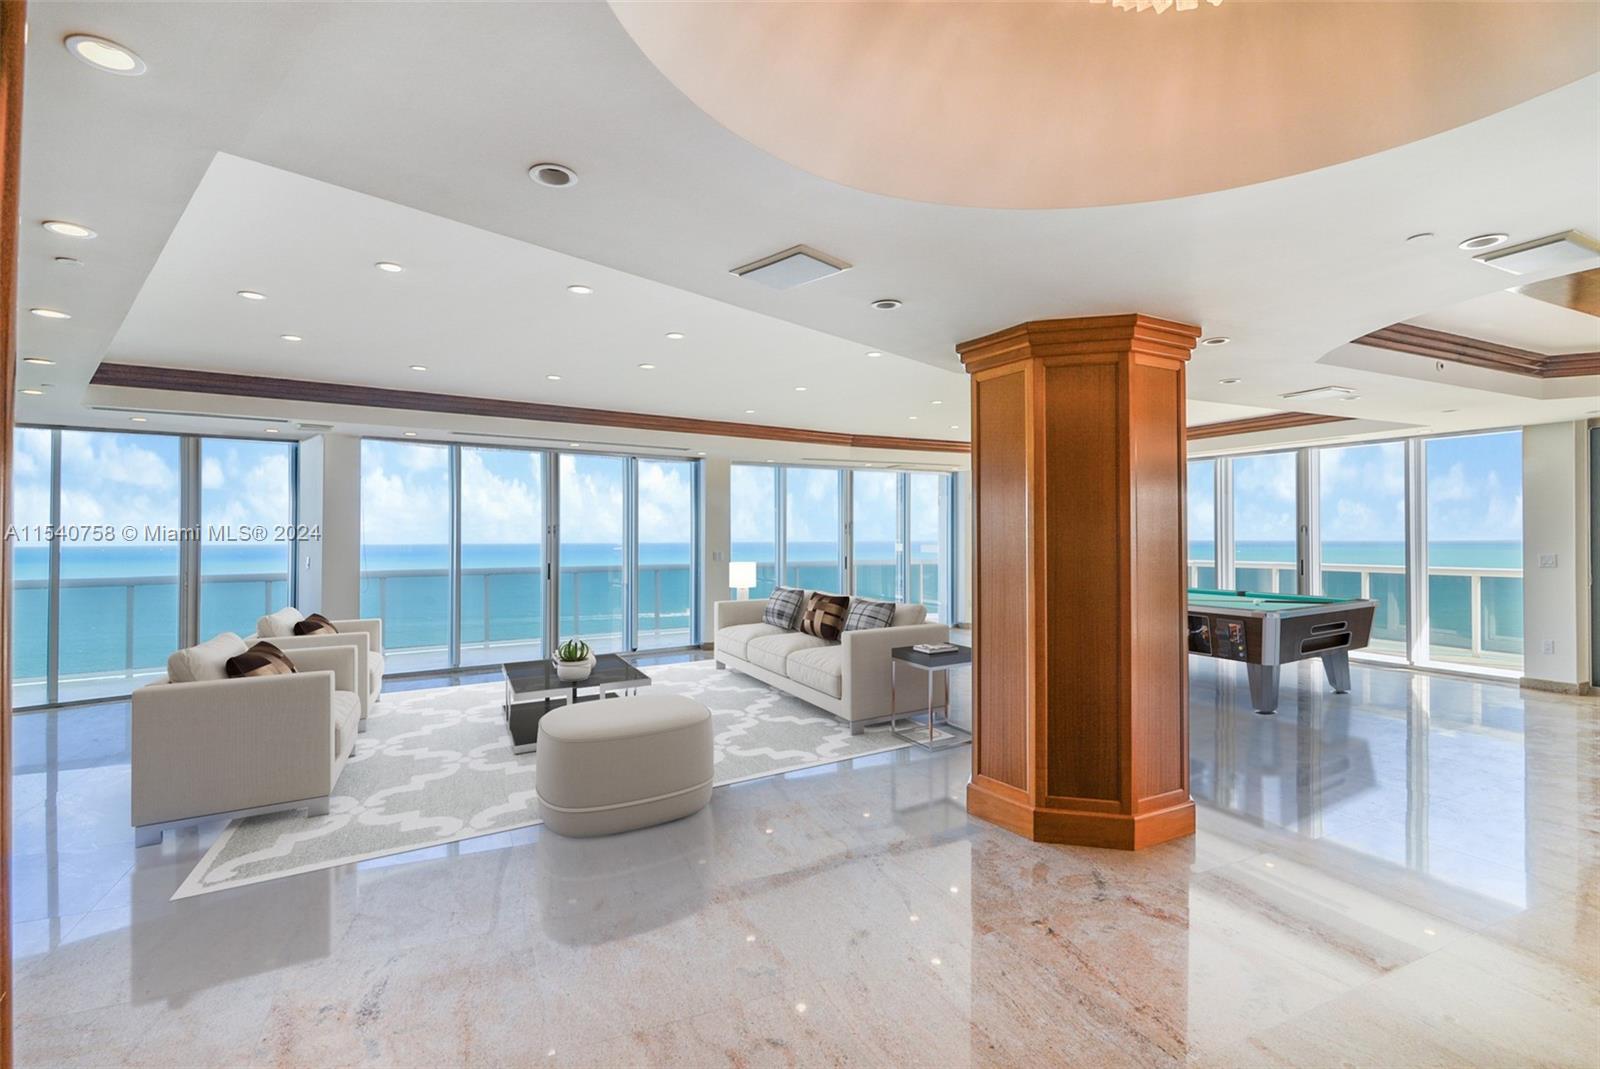 The biggest Penthouse unit in Bal Harbour. More than 5,000 sq. ft. of breathtaking views! 
This unique opportunity to live in one of the most prestigious buildings in Bal Harbour - The Majestic Tower! This full-service, private elevator building has exceptional services and amenities - fitness, spa, pool, beach service, restaurant, tennis, basketball, and security. Conveniently located next to world-famous Bal Harbour Shops. The study offers a serene ambiance and plenty of natural light, perfect for work, relaxation, or as an extra bedroom.
This beautiful property is available for rent with flexible options: Seasonal Rental: $40,000; Annual Rental: $29,000